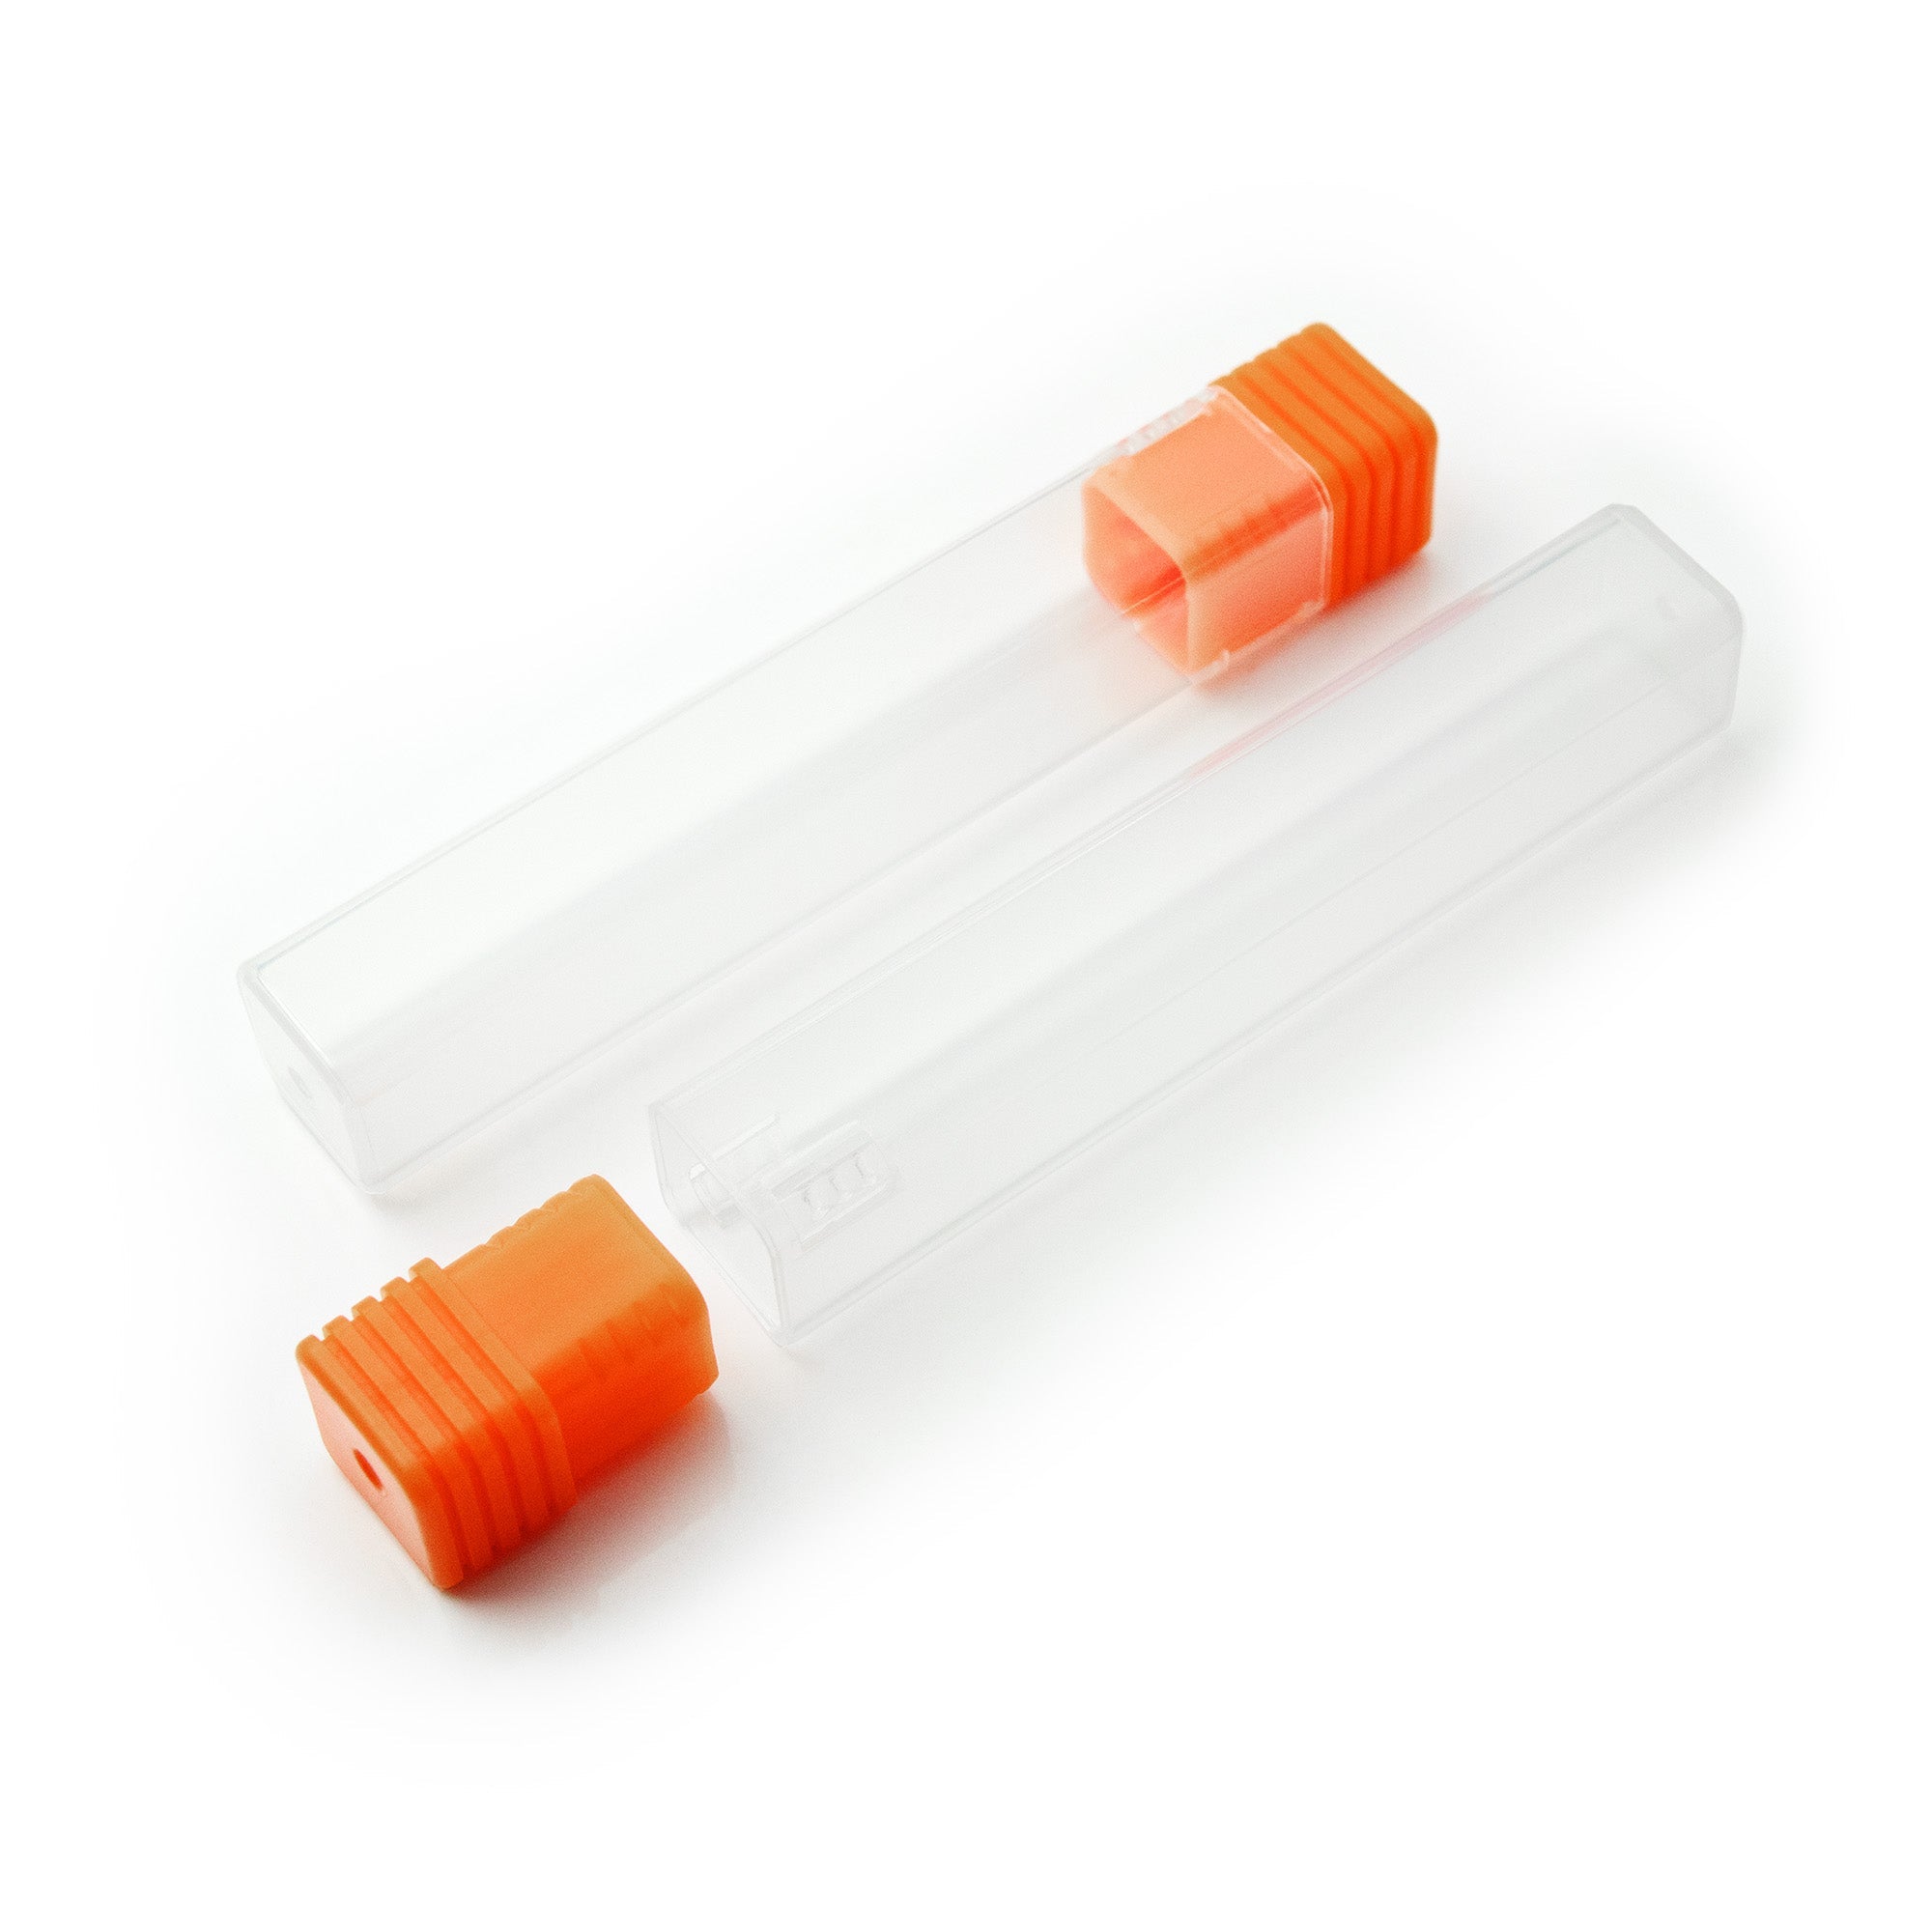 Compact Orange Cap Clear Square Bottle/ Container for Watch tools or Components, Set of Two Strapcode watch bands